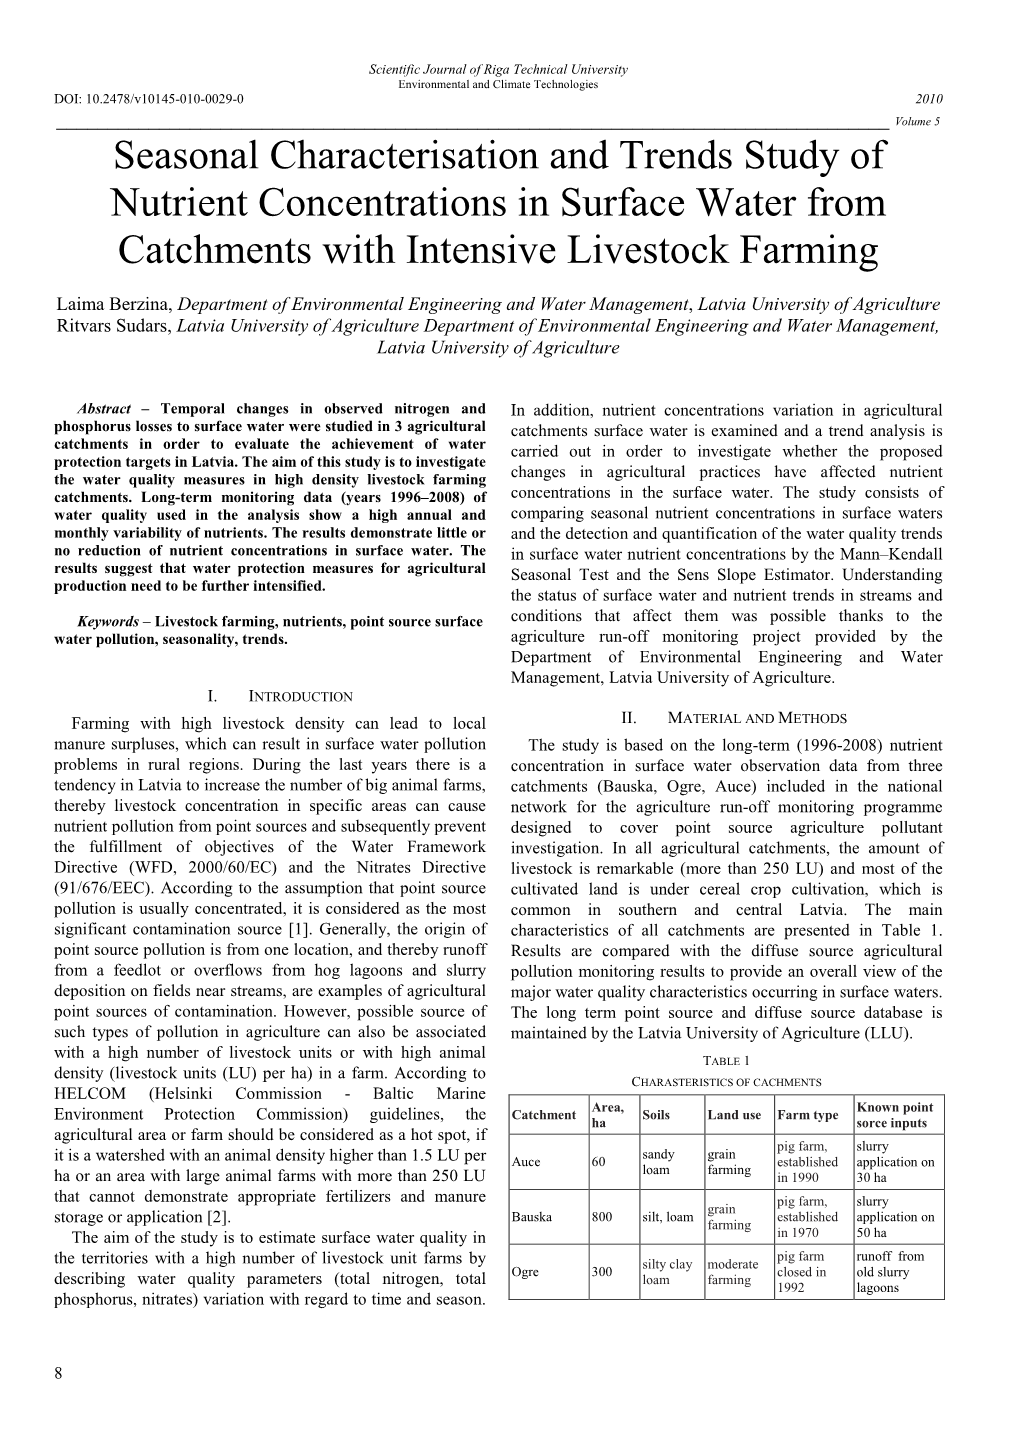 Seasonal Characterisation and Trends Study of Nutrient Concentrations in Surface Water from Catchments with Intensive Livestock Farming